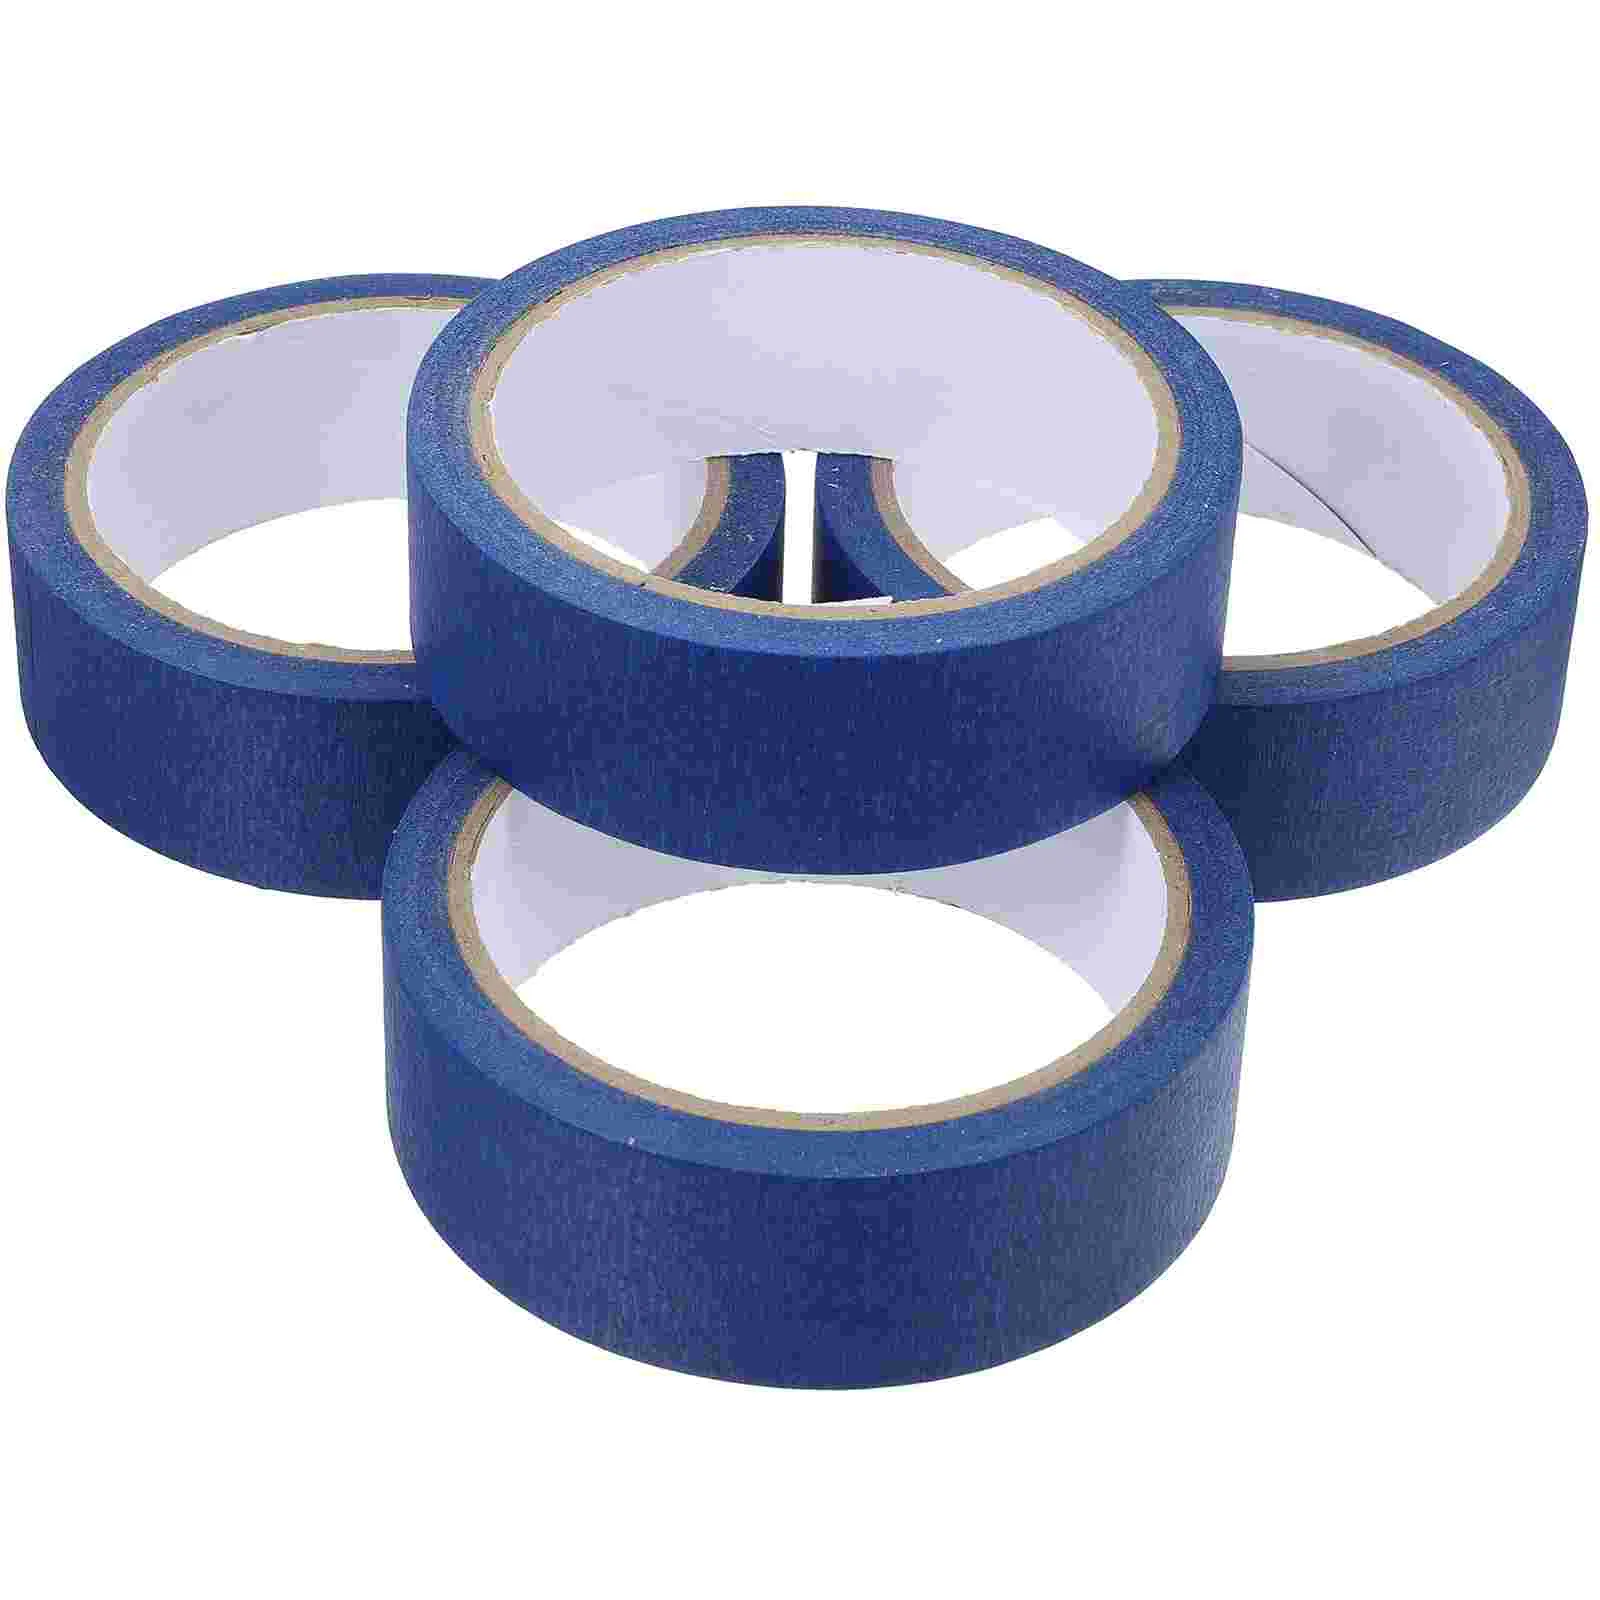 Blue Masking Tape DIY Tapes Crafts Adhesive Paint for Painting Painter Duct flyingbee 15mmx5m cute dog journal washi tape kawaii masking tapes for kids diy decorative diary scrapbooking photo ablums x0857